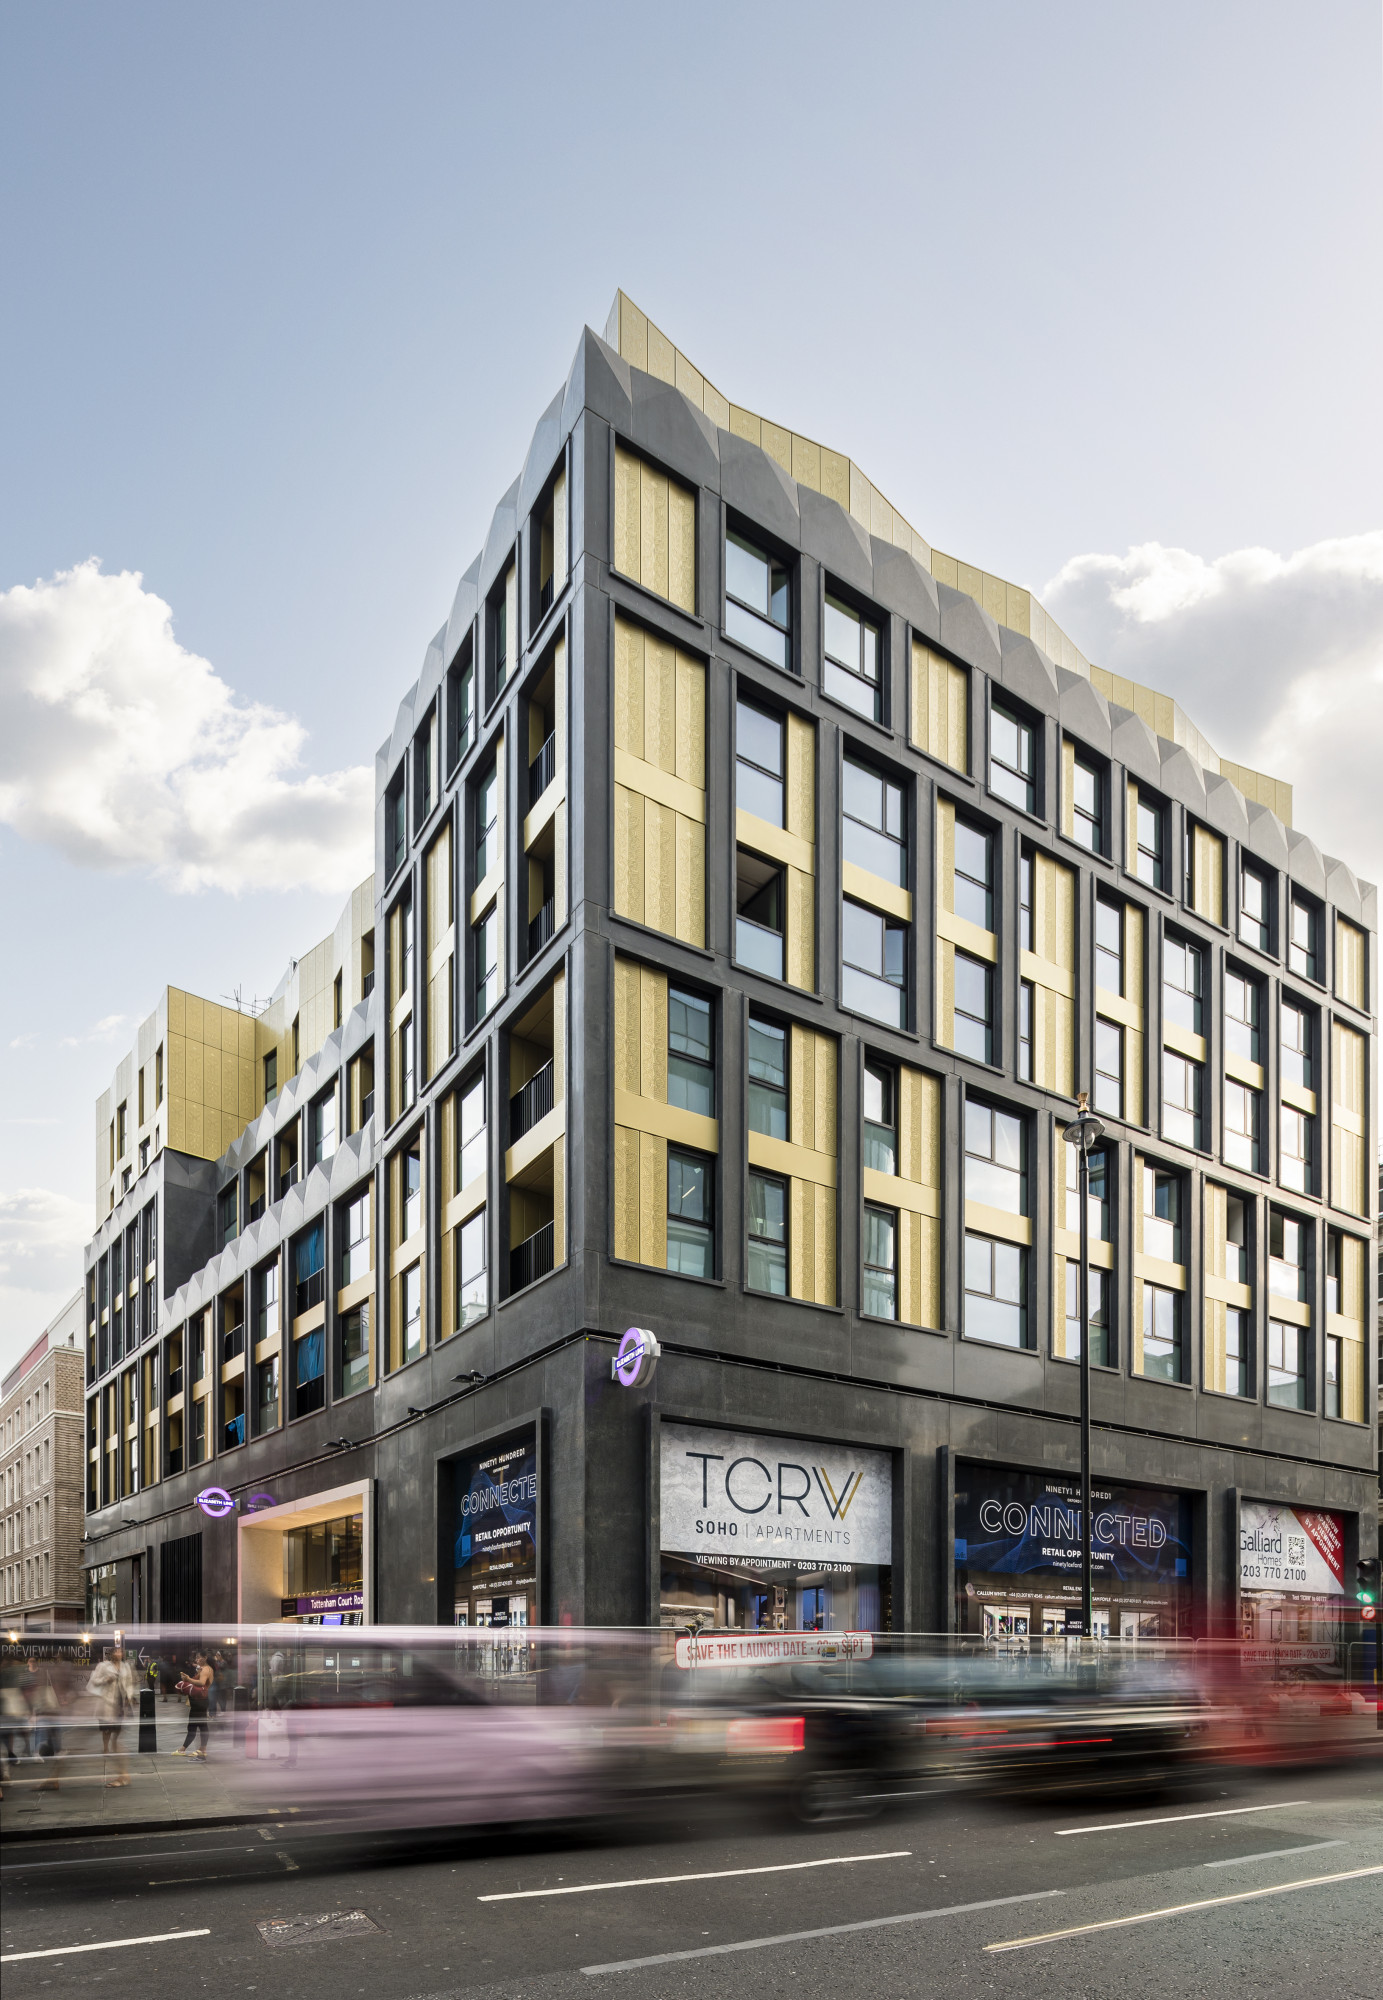 1 bed Residential Apartments Building For Sale in London, London - thumb 2